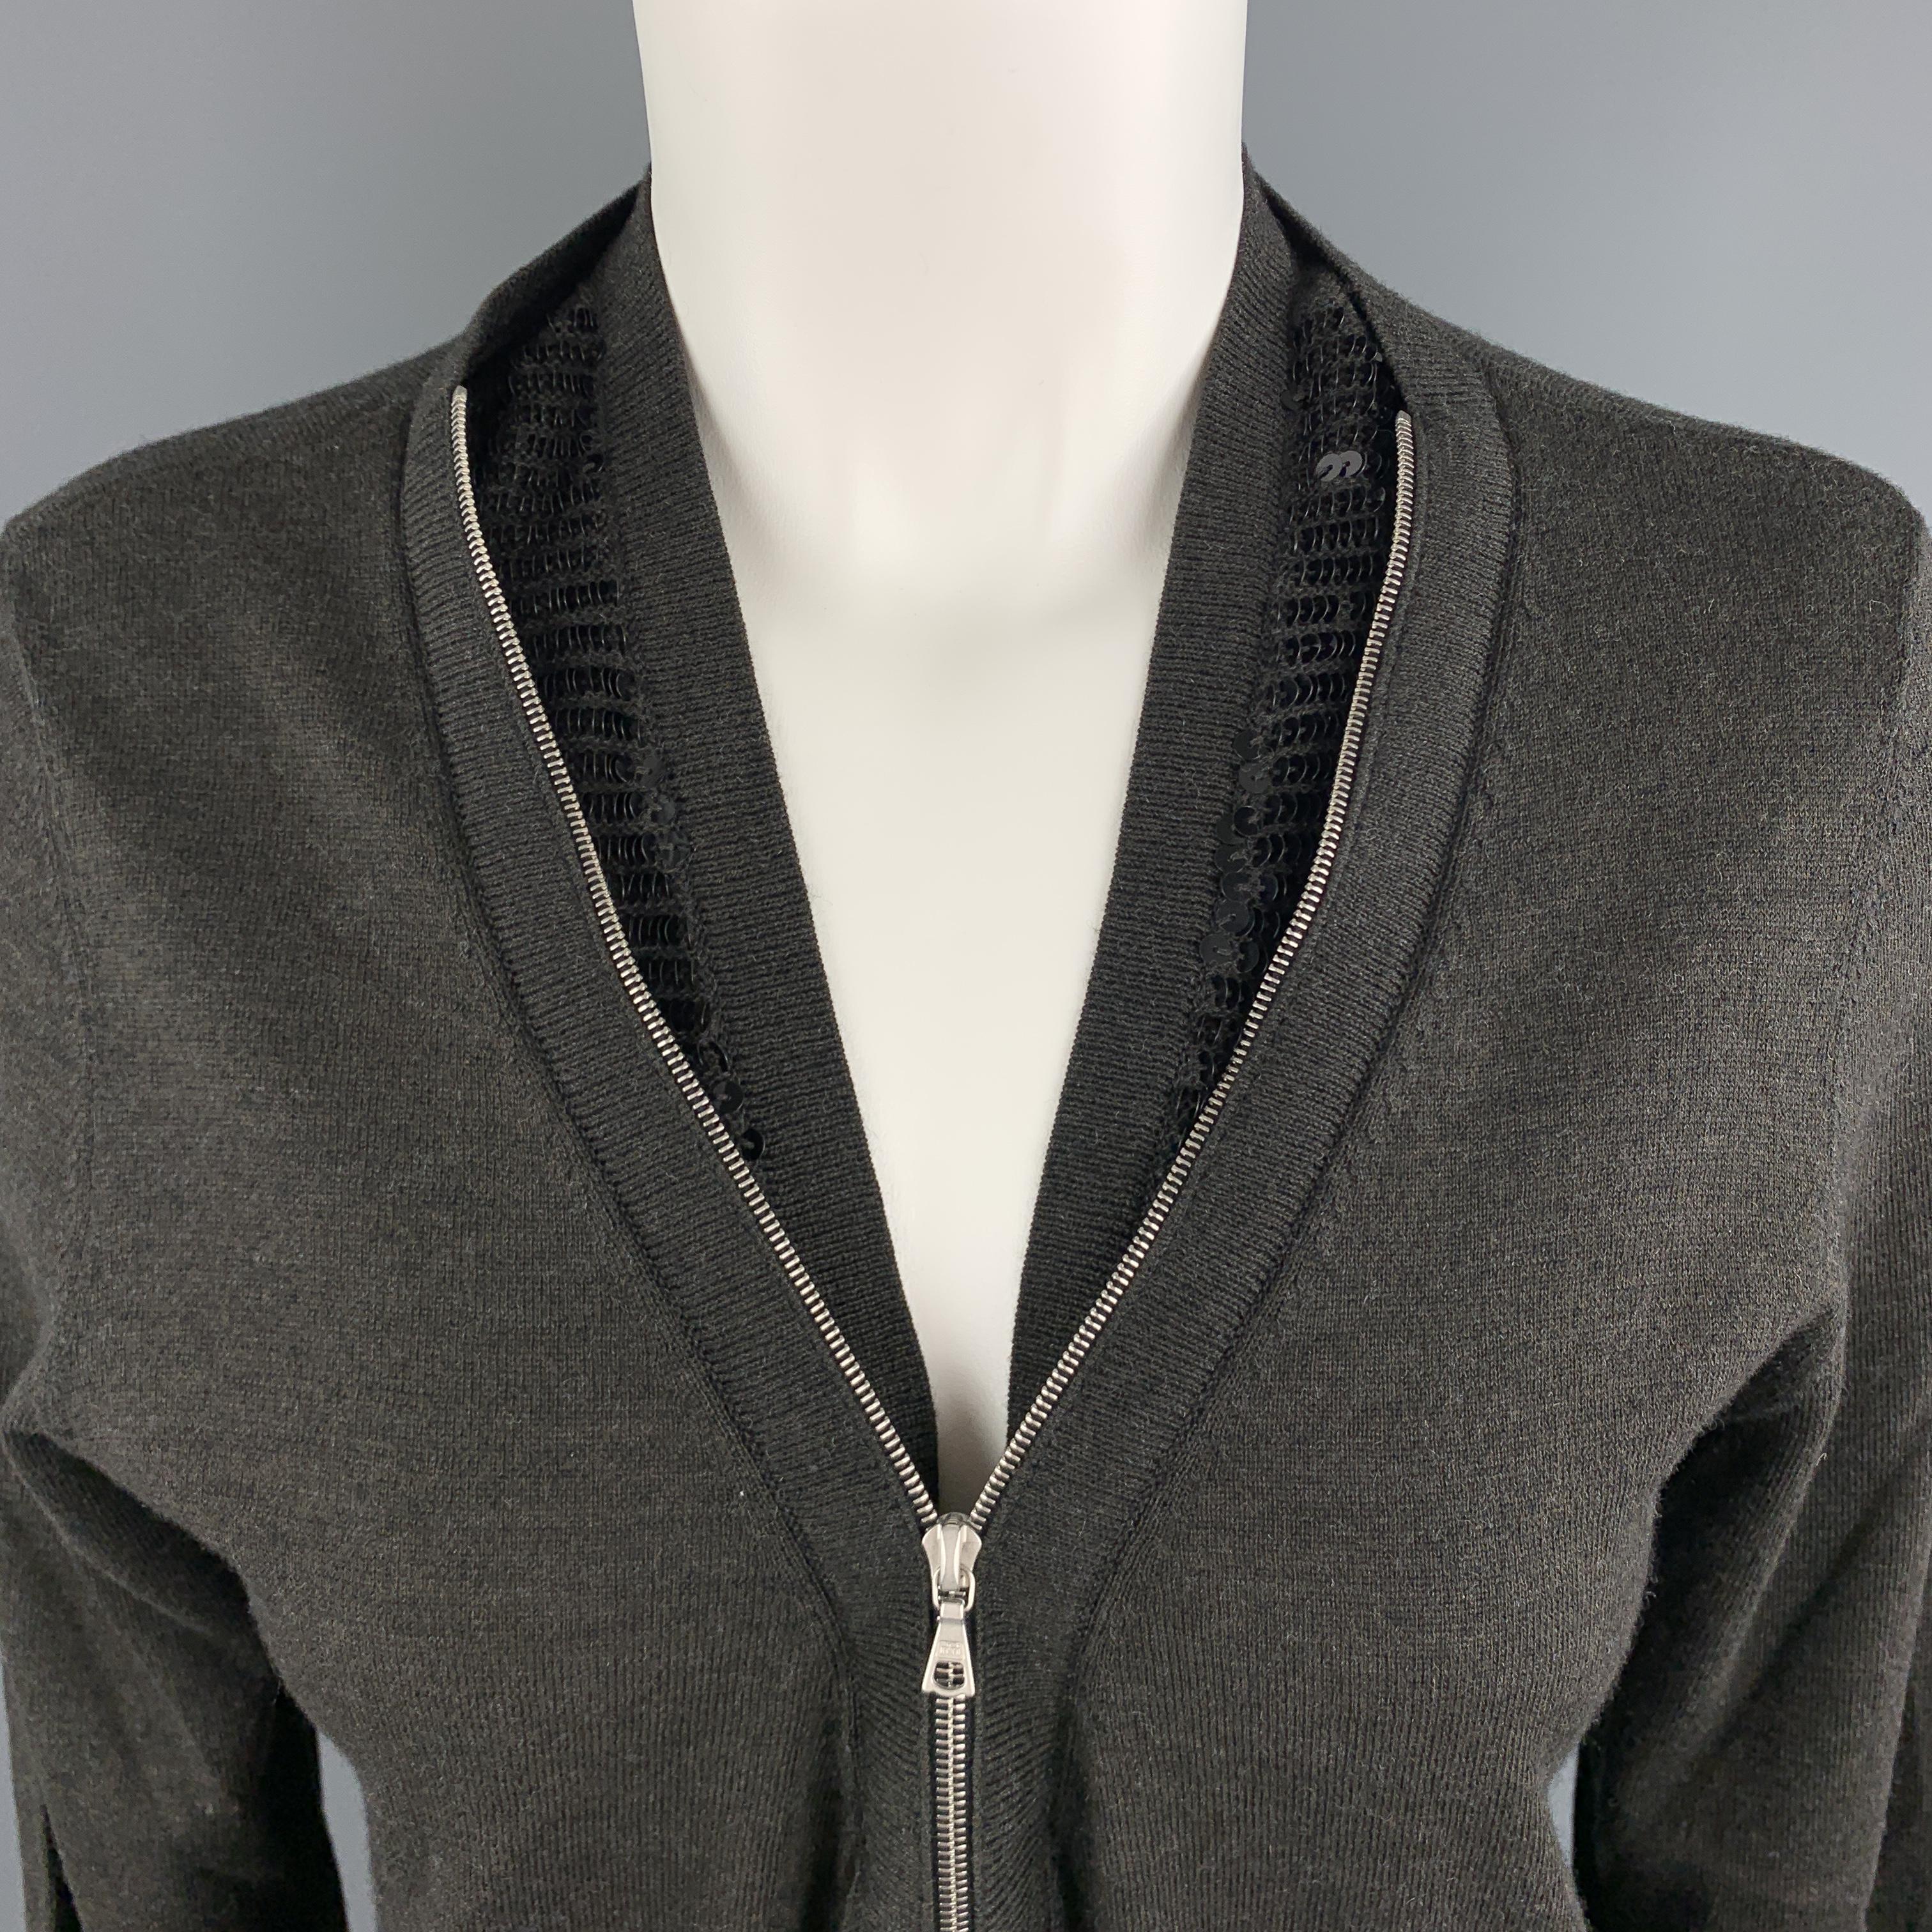 DRIES VAN NOTEN cardigan comes in charcoal wool blend with a sequin inner collar neckline and zip front. Made in Belgium.

Excellent Pre-Owned Condition.
Marked: Small

Measurements:

Shoulder: 16 in.
Bust: 40 in.
Sleeve: 24 in.
Length: 23 in.